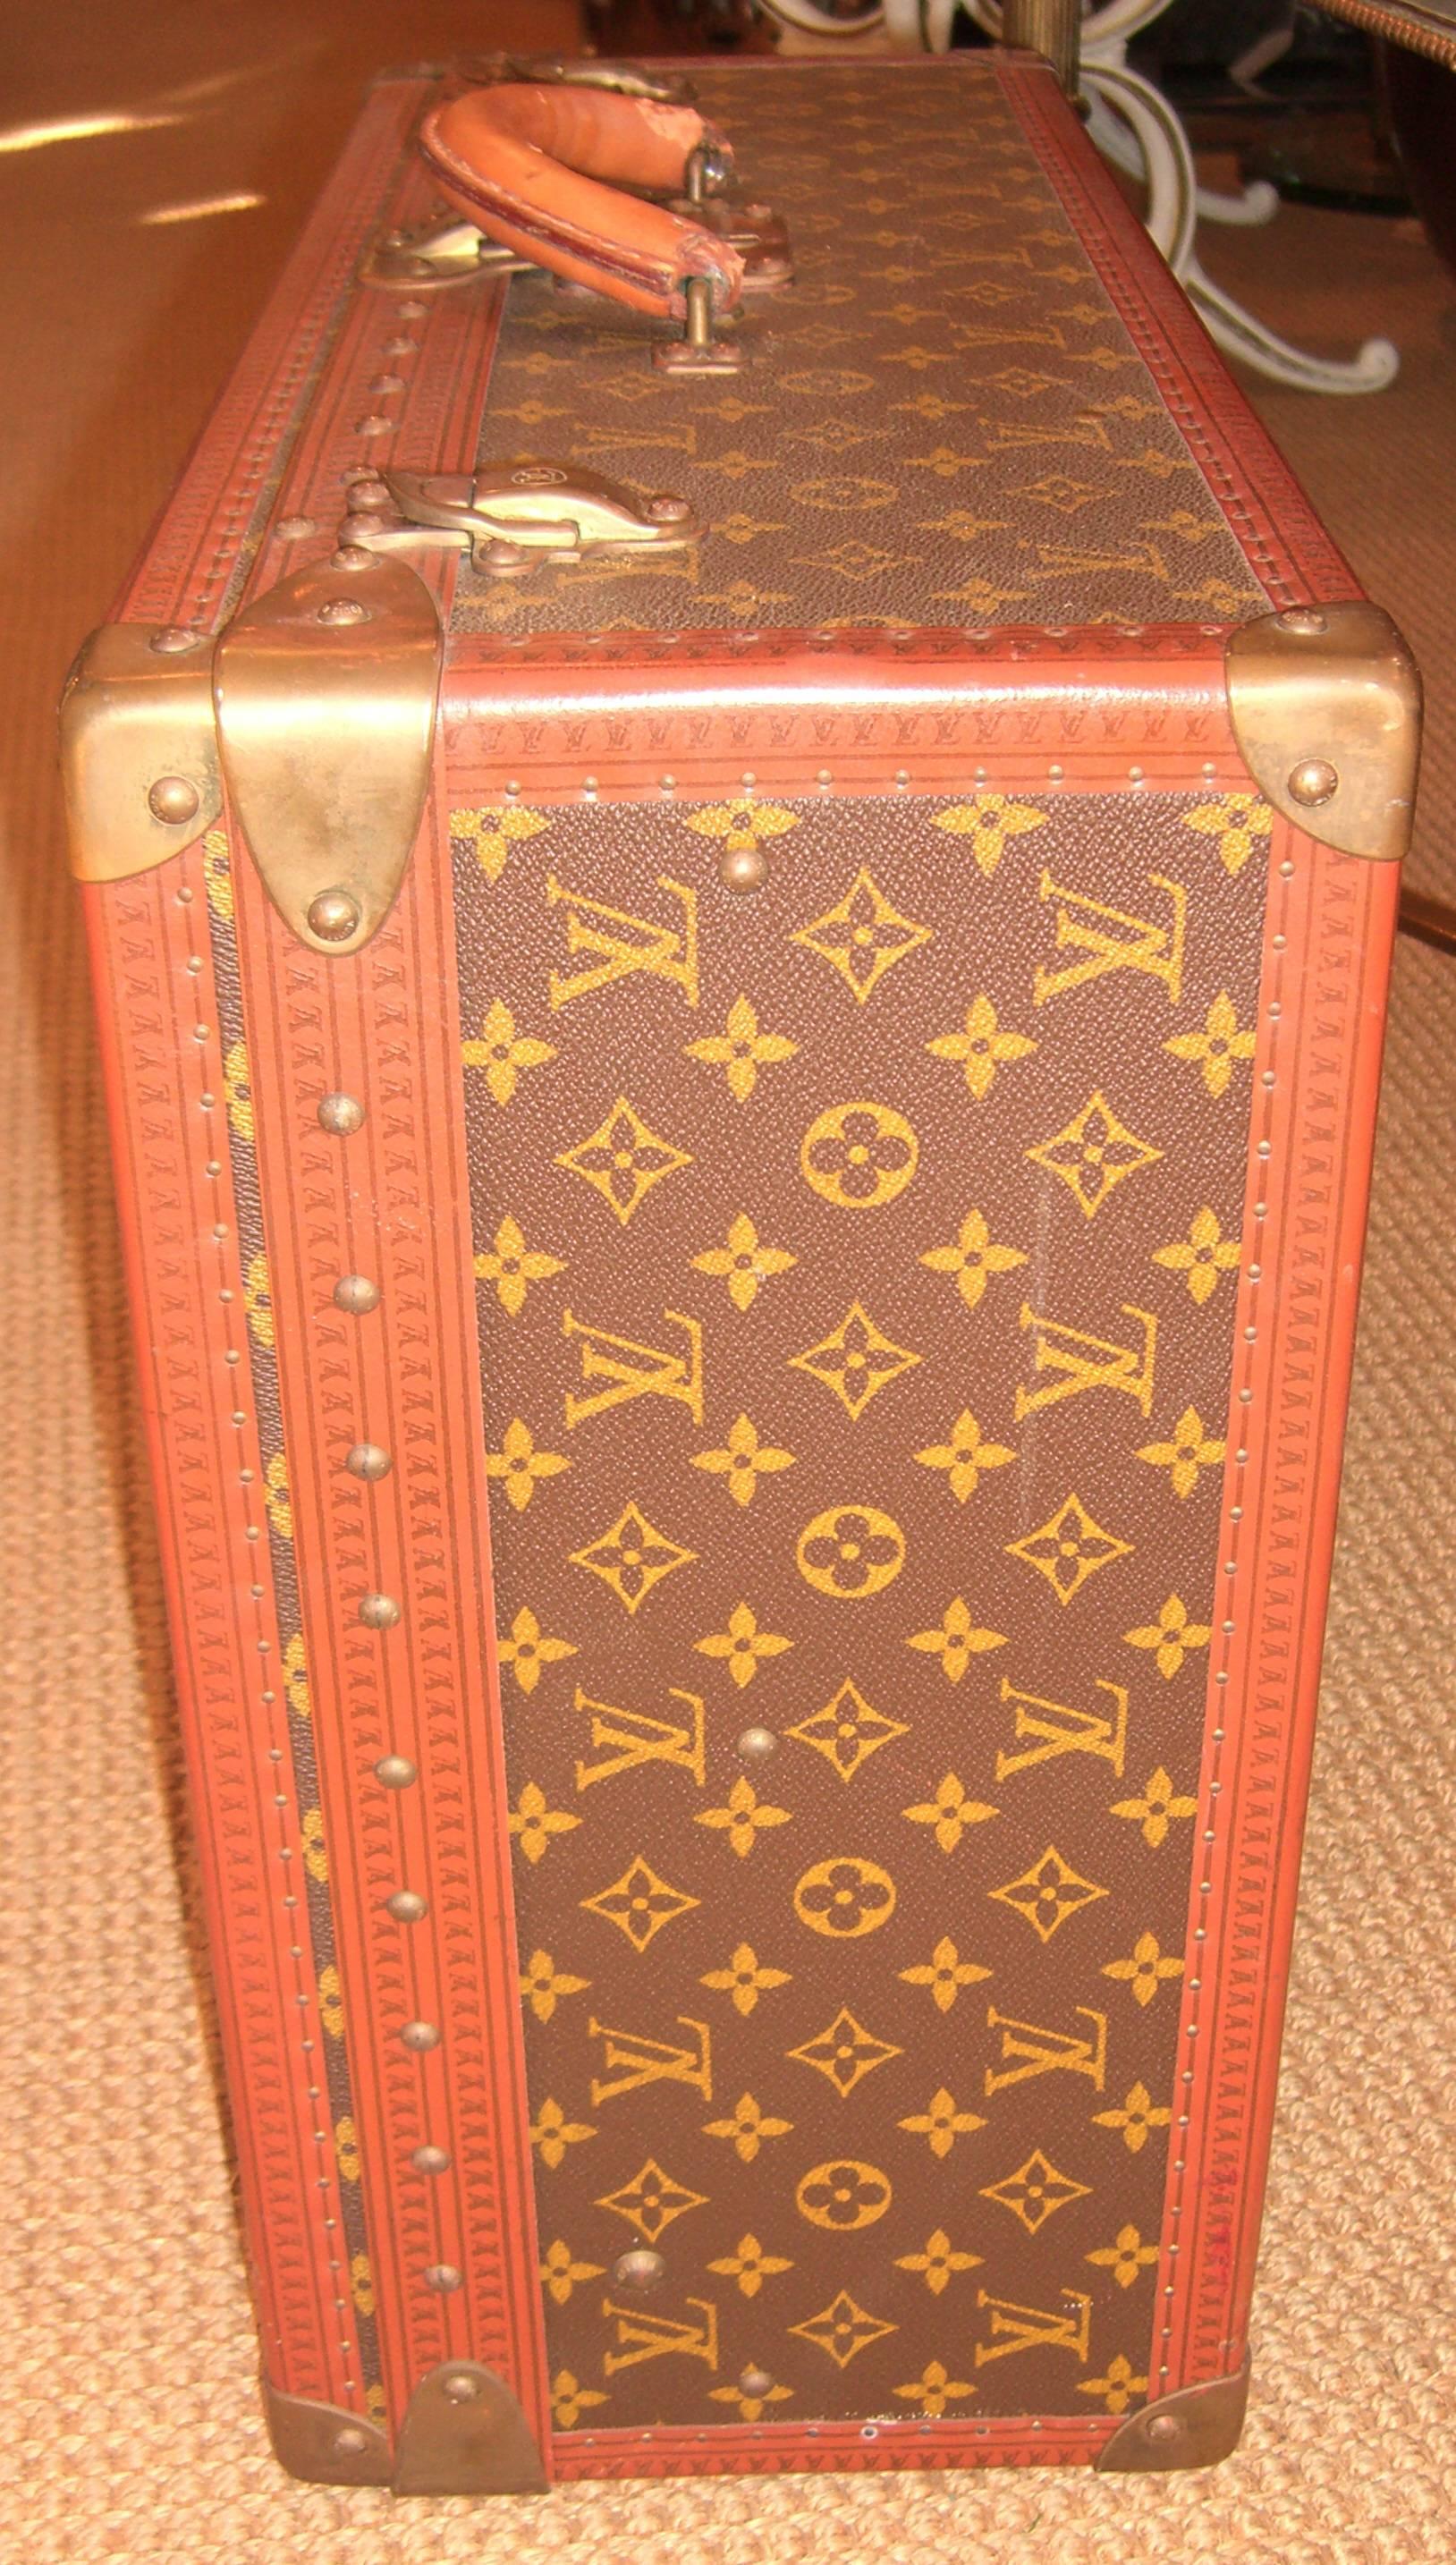 An authentic Louis Vuitton suitcase with removable tray.